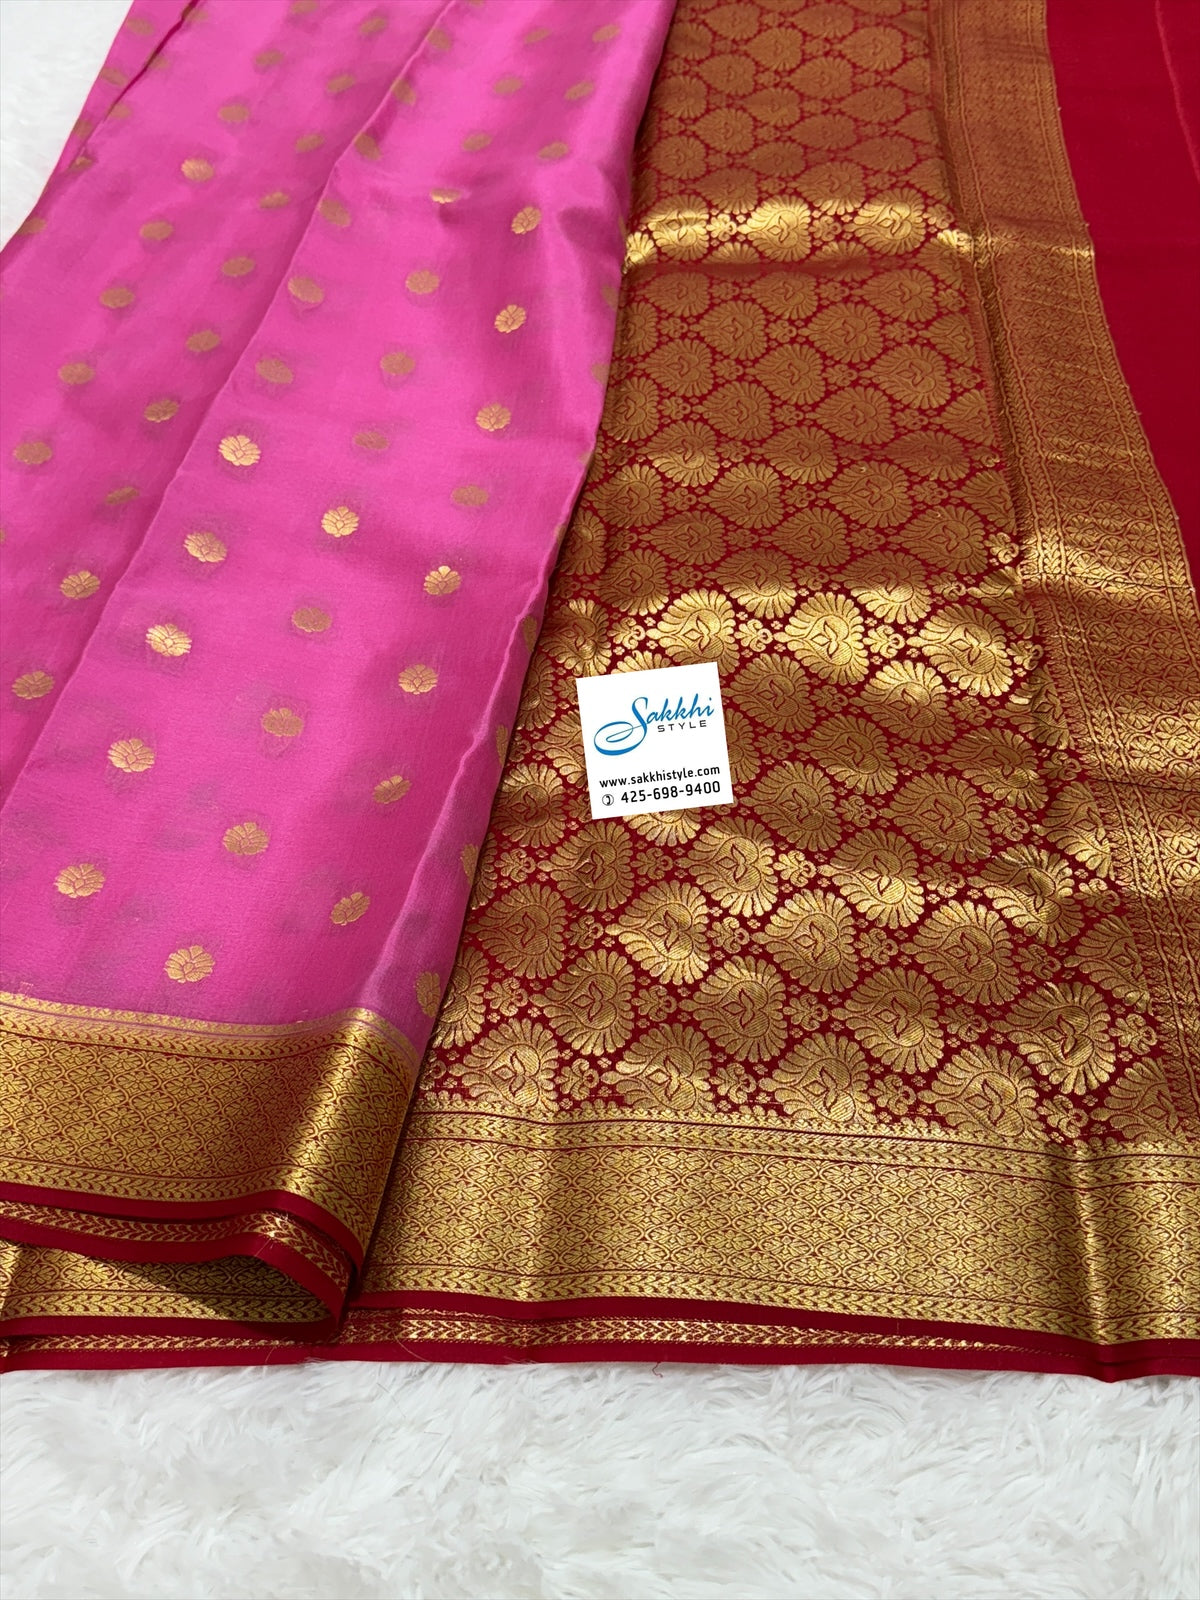 PURE MYSORE SILK SAREE IN BLEND OF LIGHT PINK AND MAROON HUES